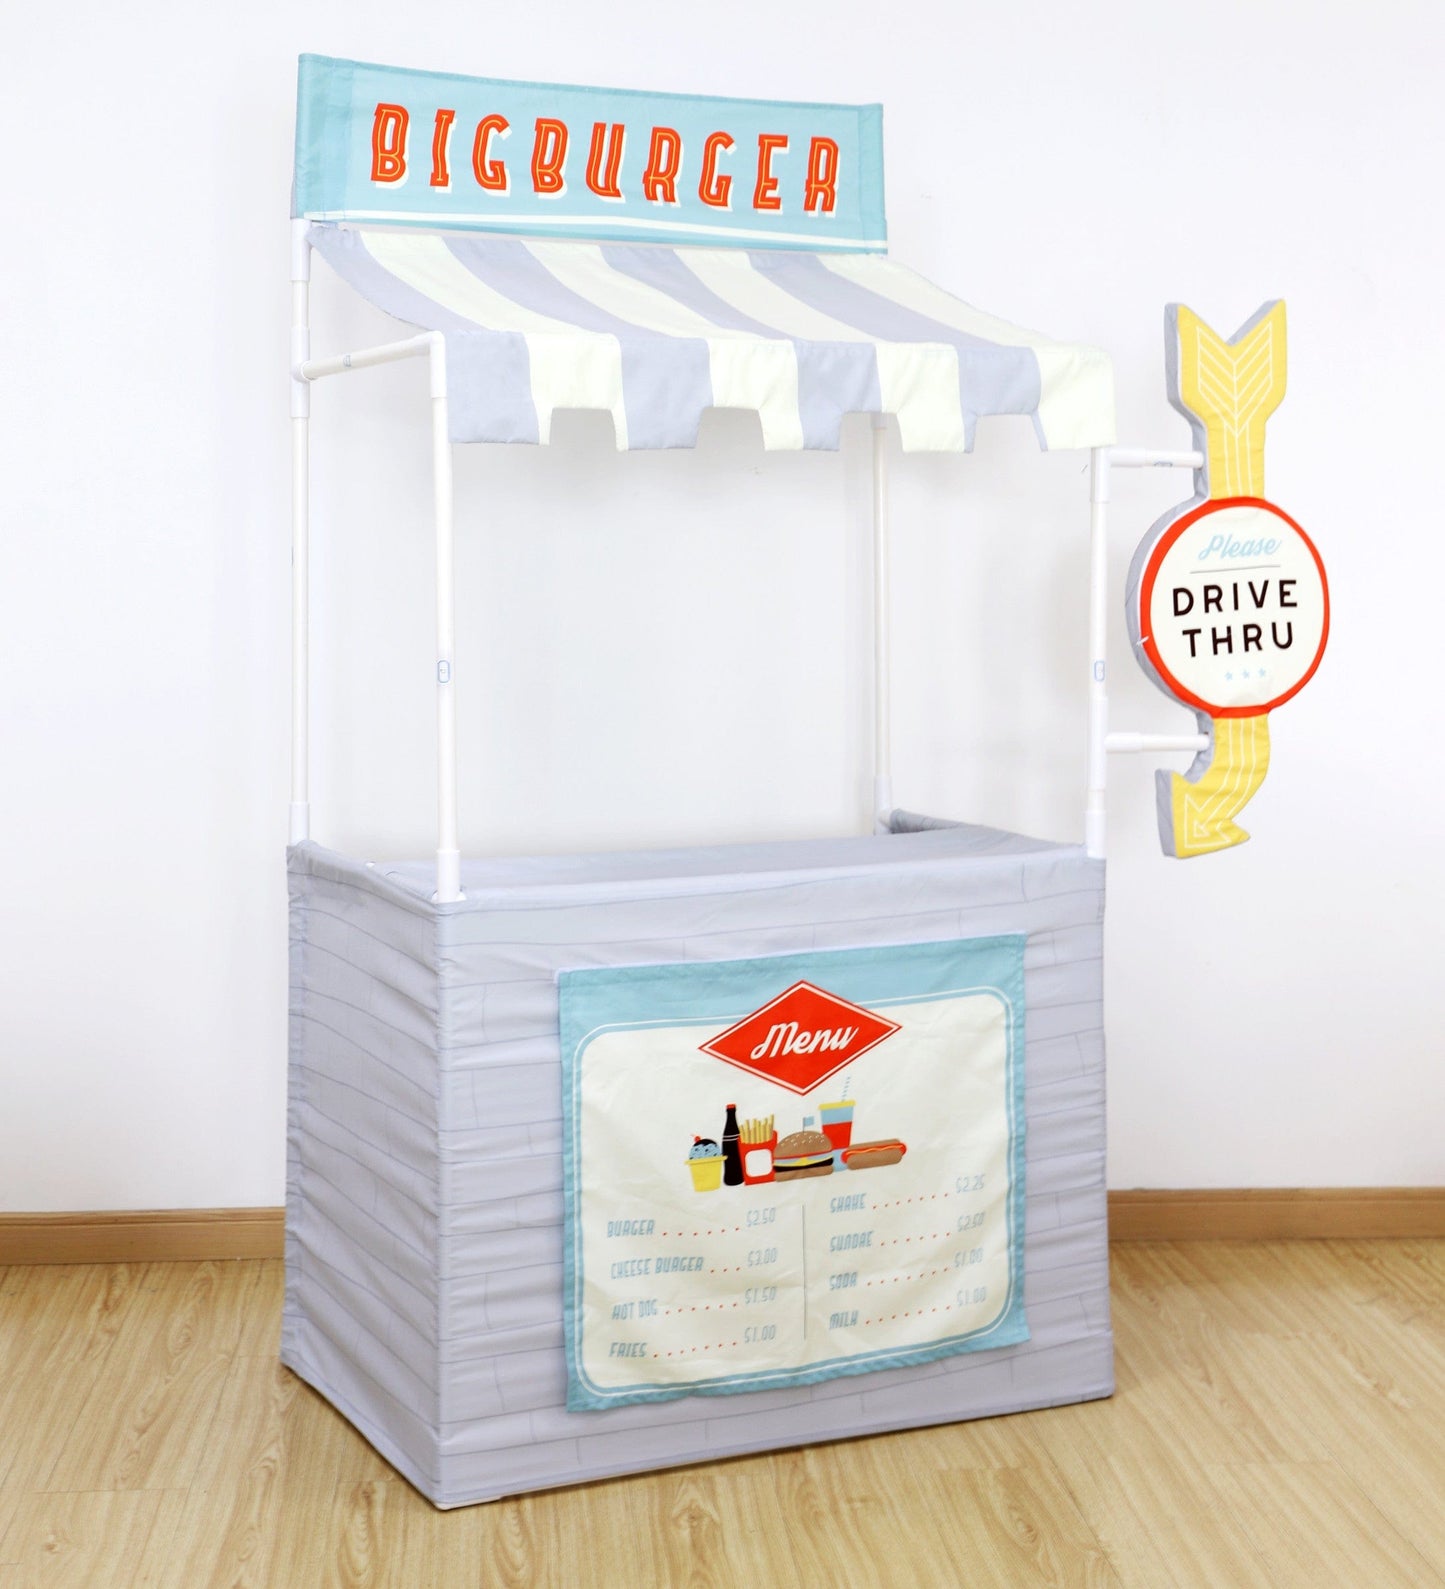 3-in-1 Pretend Business Play Stand